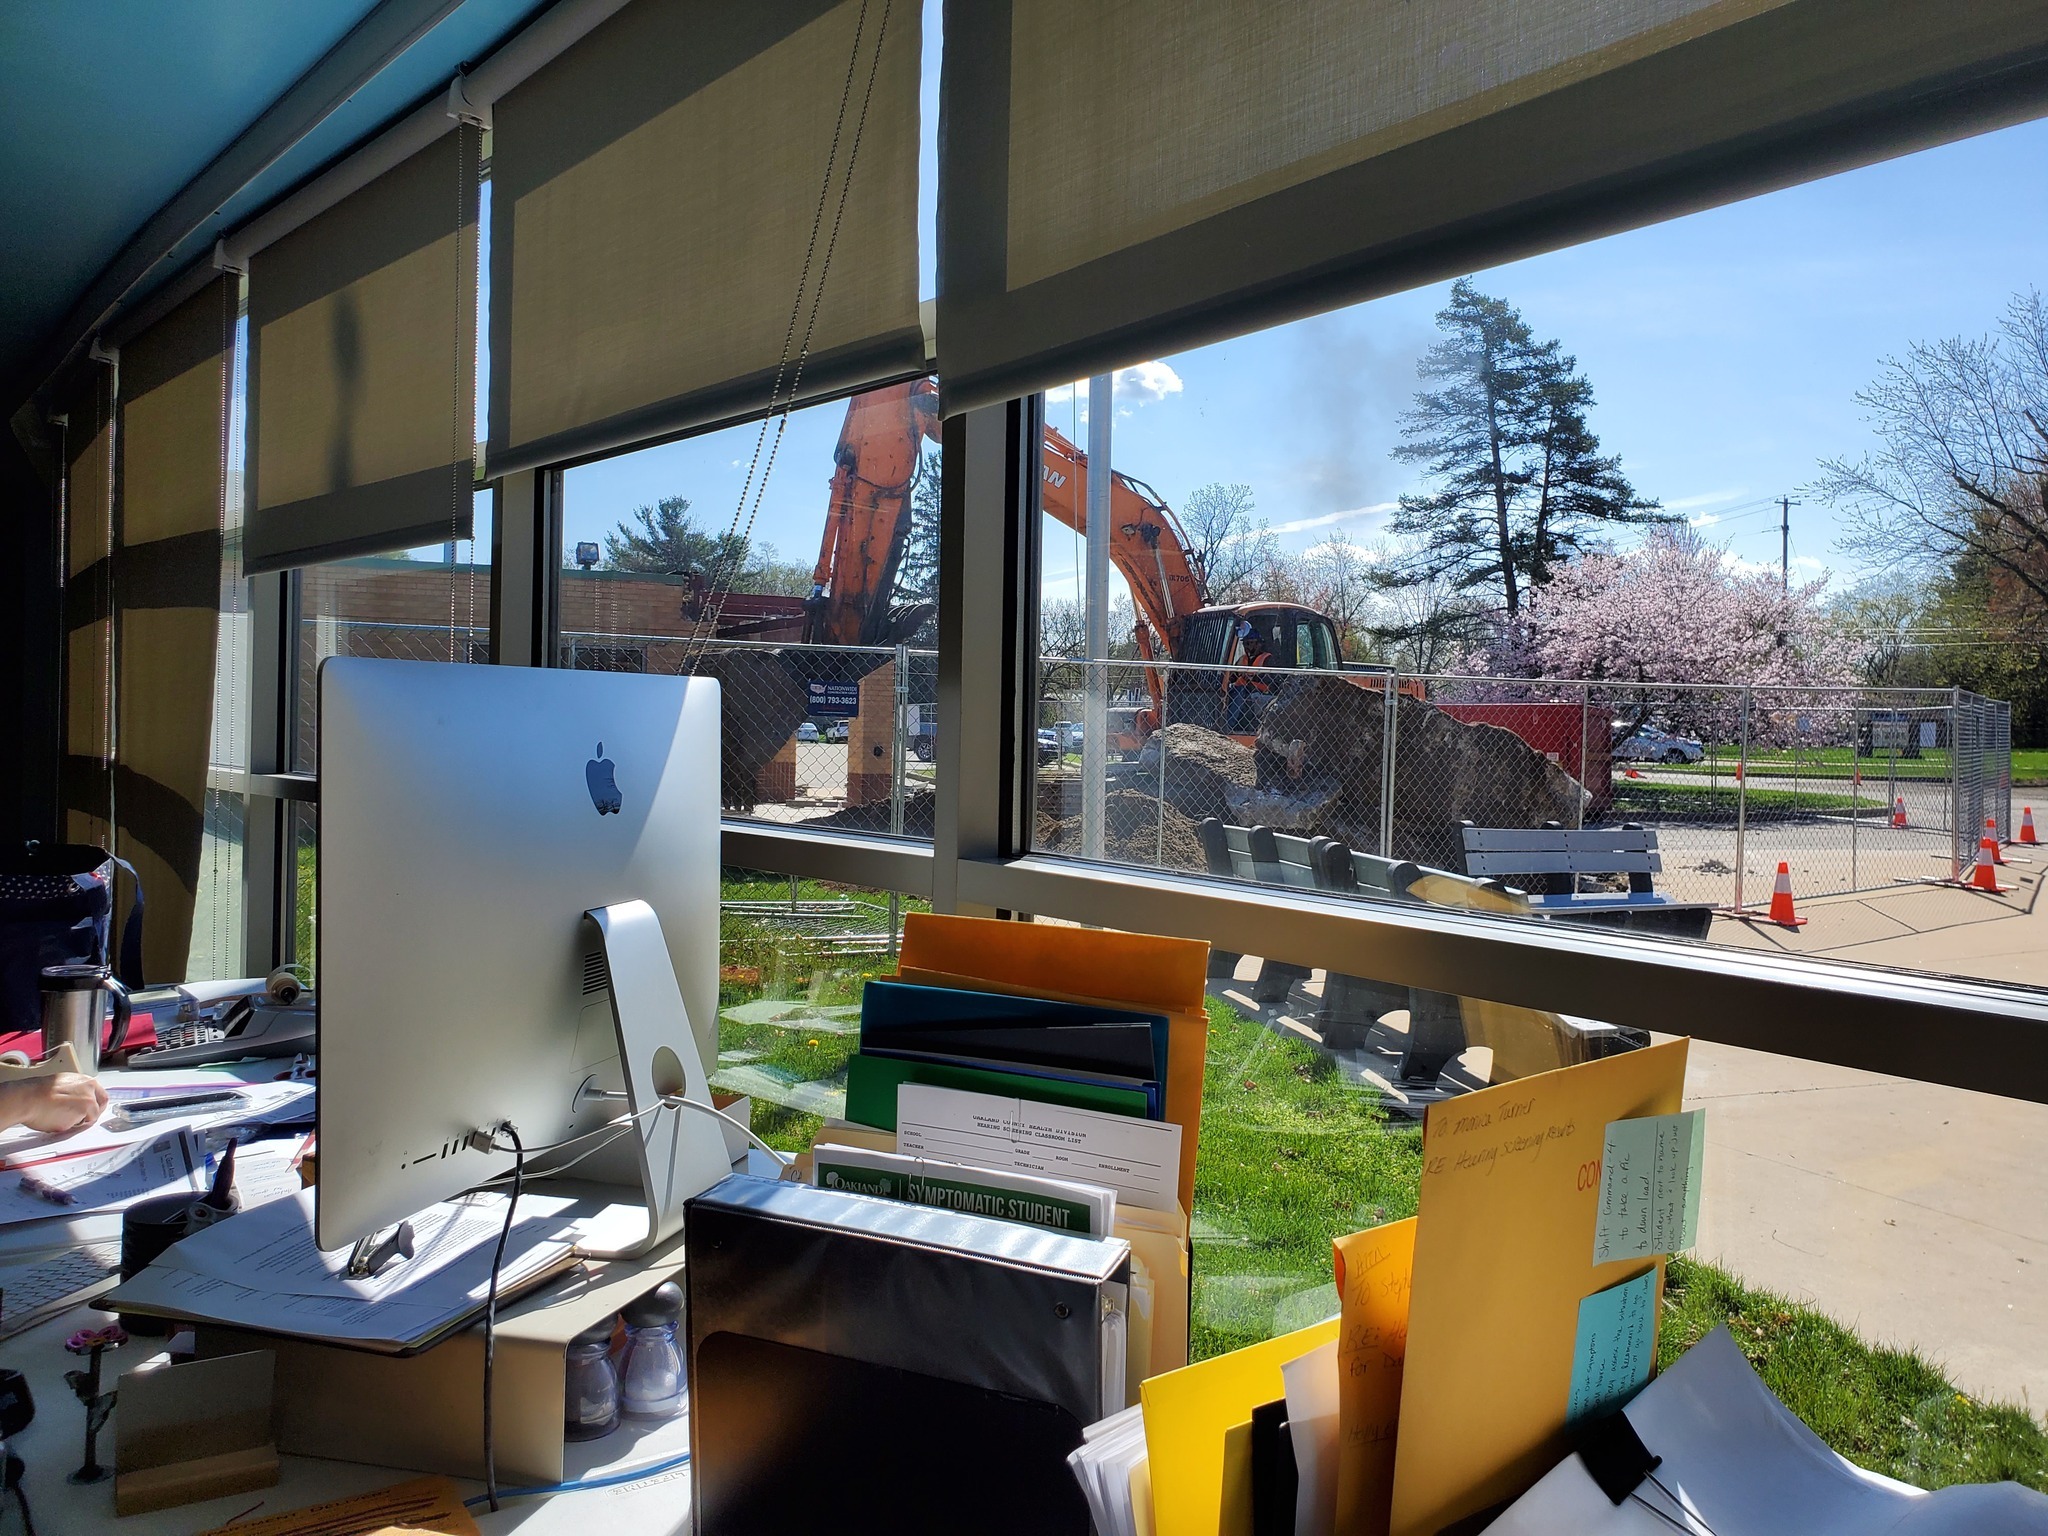 View of construction equipment from the windows in the library (temporary office)